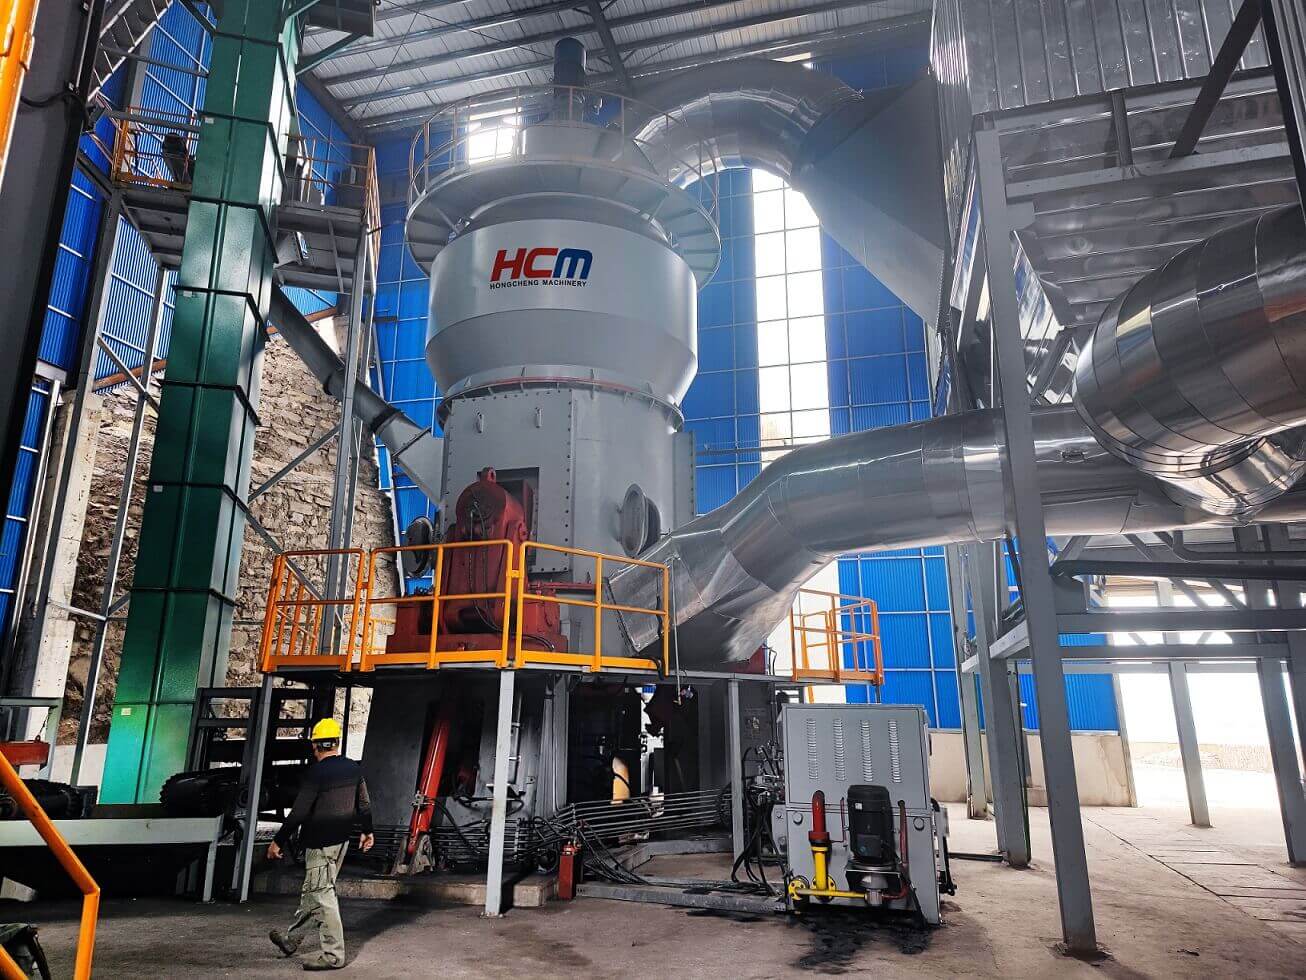 What equipment is used for grinding lithium iron phosphate